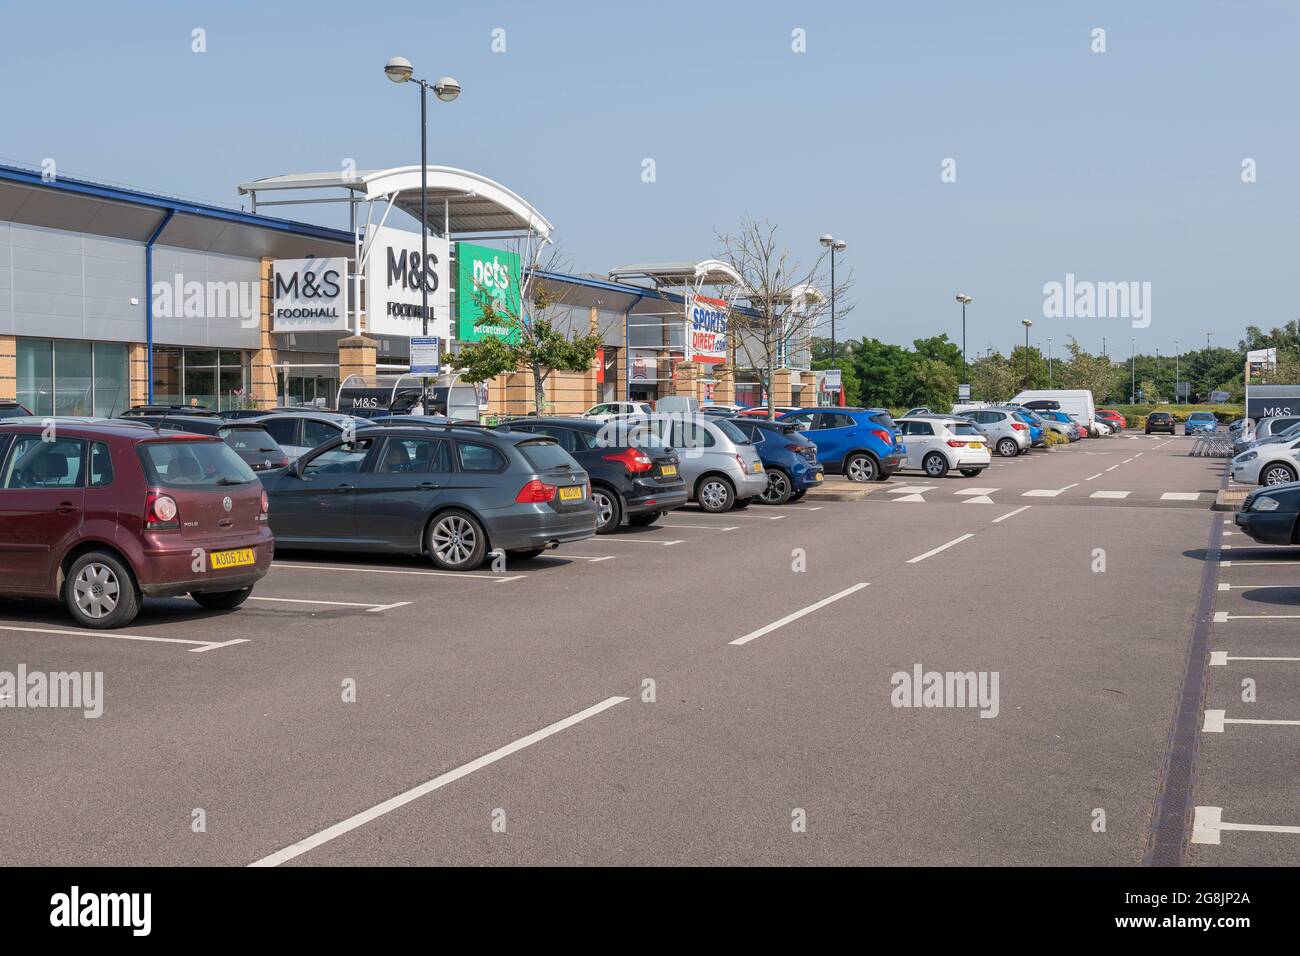 A view of Longwater retail car park with cars parked in allocated spaces Stock Photo